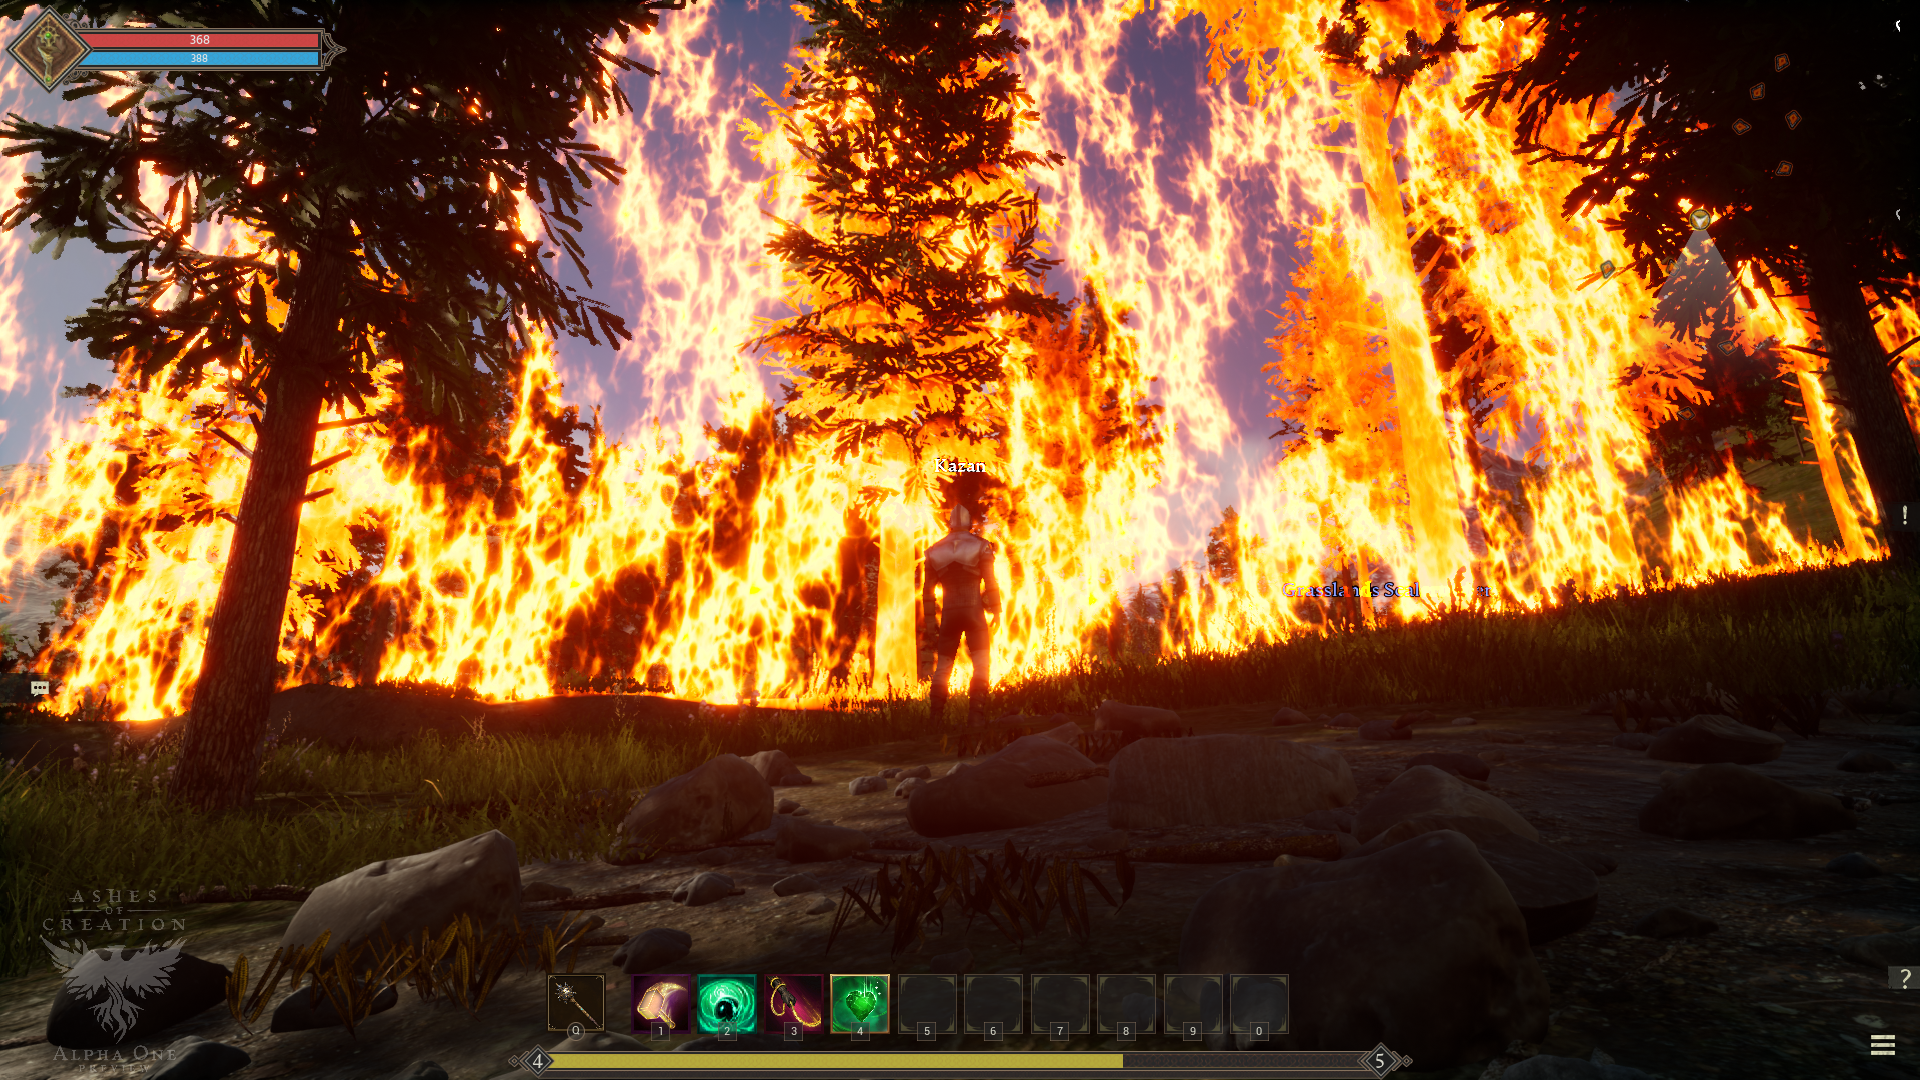 The out of bounds wall reaches towards the sky like a wall of fire.